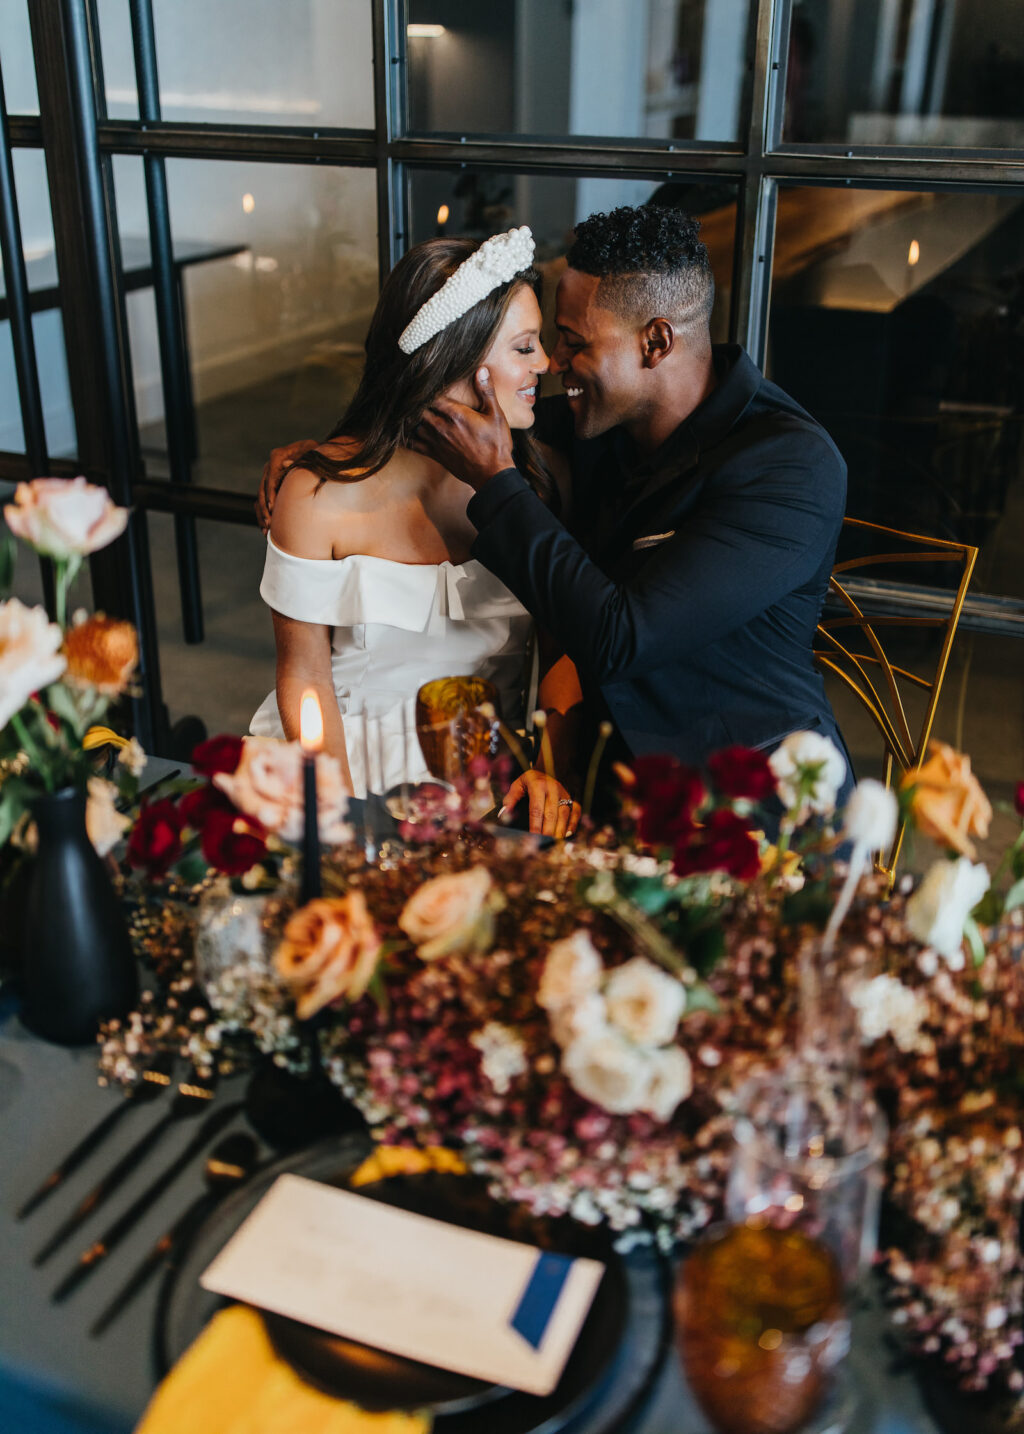 Modern and Edgy Fall Wedding Reception, Groom Wearing All Black Tuxedo Intimate Sitting at Reception Table with Bride Wearing Off the Shoulder Wedding Dress, Thick Pearl Headband,Burgundy Red, White, Blush Pink and Yellow Roses with Greenery Flowers Babys Breathe Floral Centerpiece | Tampa Bay Wedding Venue Hyde House